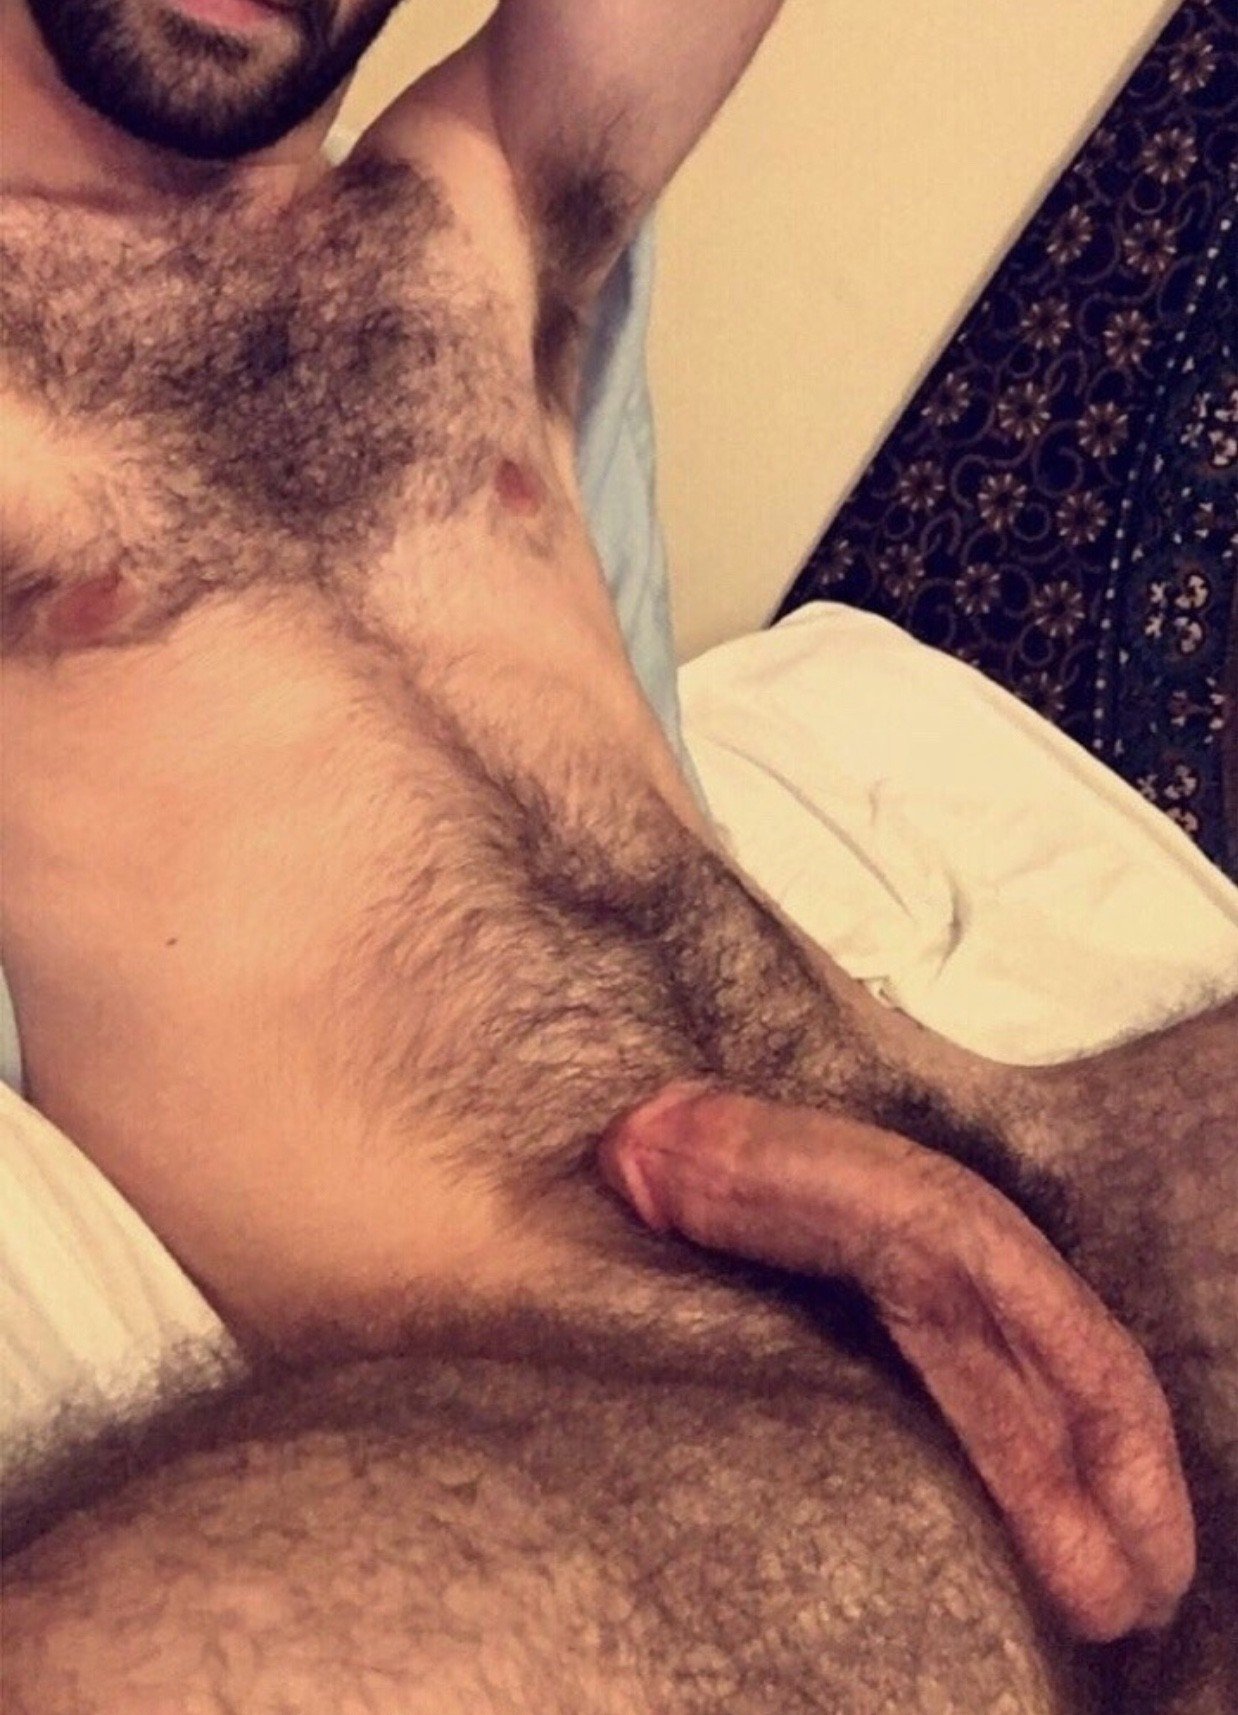 Photo by LeFoutre with the username @LeFoutre,  December 13, 2018 at 10:45 PM. The post is about the topic Gay Hairy Male and the text says 'Hairy delight!'